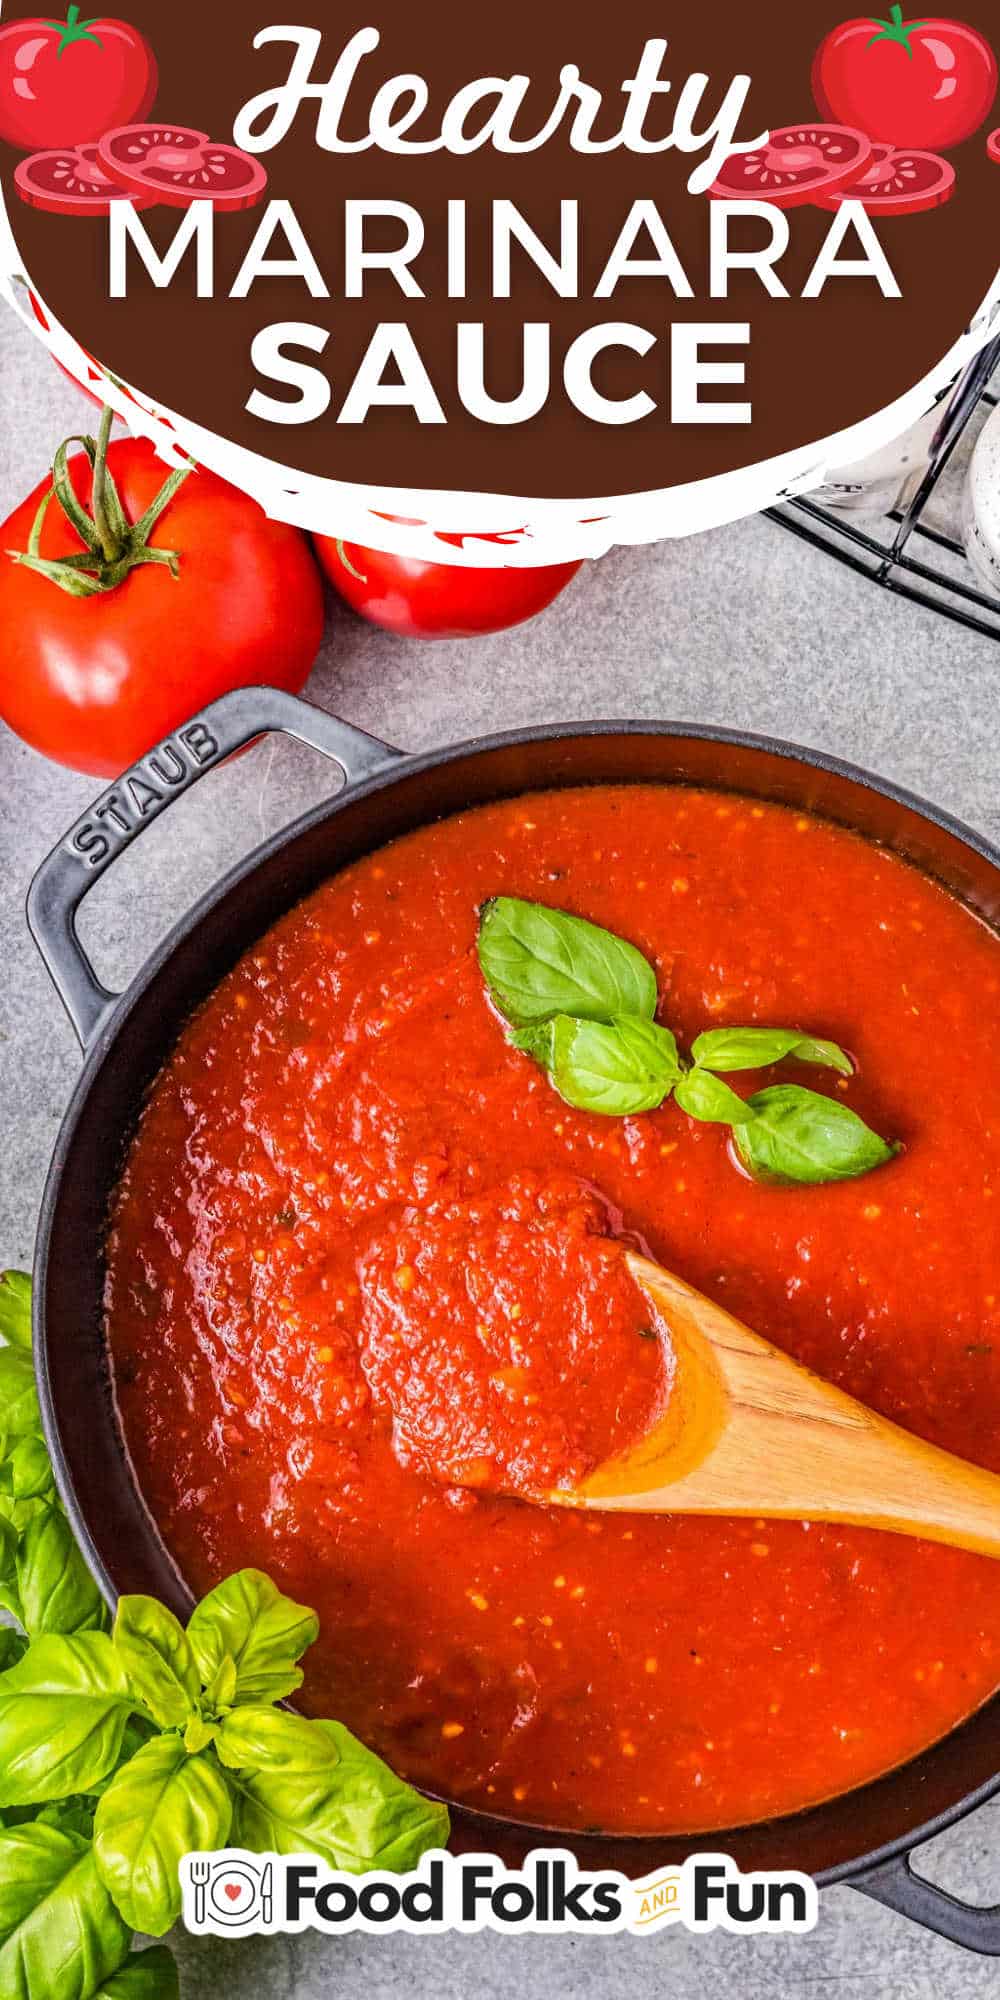 This Hearty Marinara Sauce is made with simple ingredients: crushed tomatoes, onion, garlic, and spices. With this easy recipe, you get all the luscious flavor of traditional marinara sauce in a fraction of the time! via @foodfolksandfun